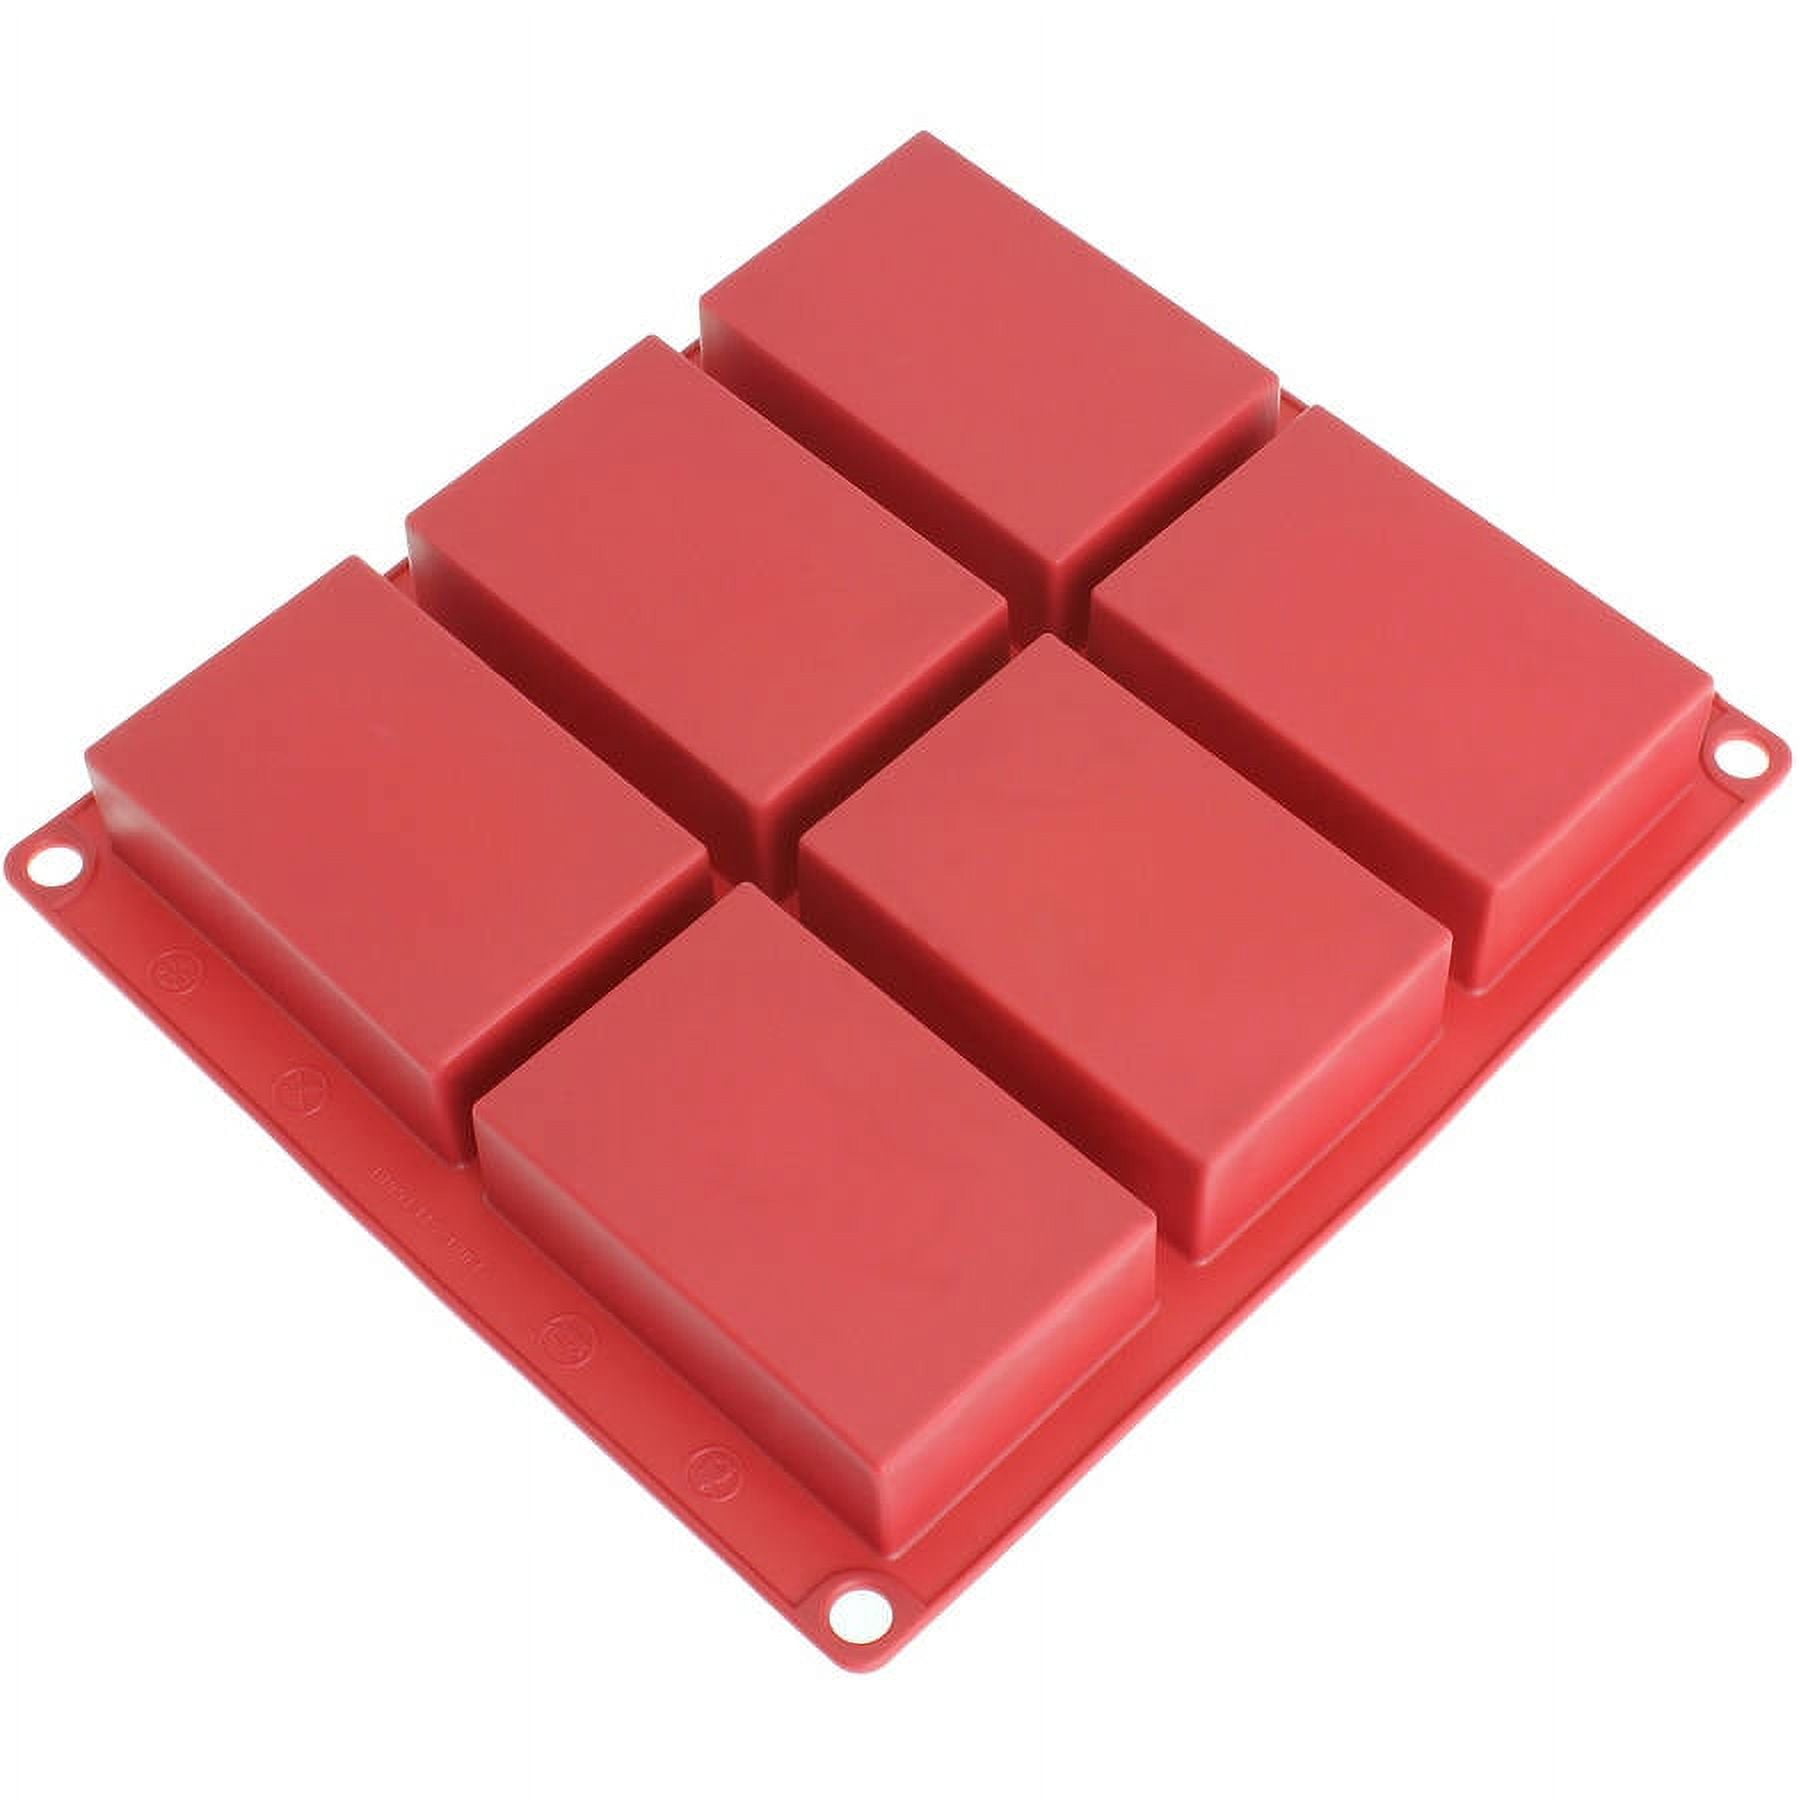 Bluedrop Silicone Bread Forms Square Shape Bread Molds Non Stick Bakery  Trays Silicone Coated Fiber Glass 6 Caves Rectangle Moulds